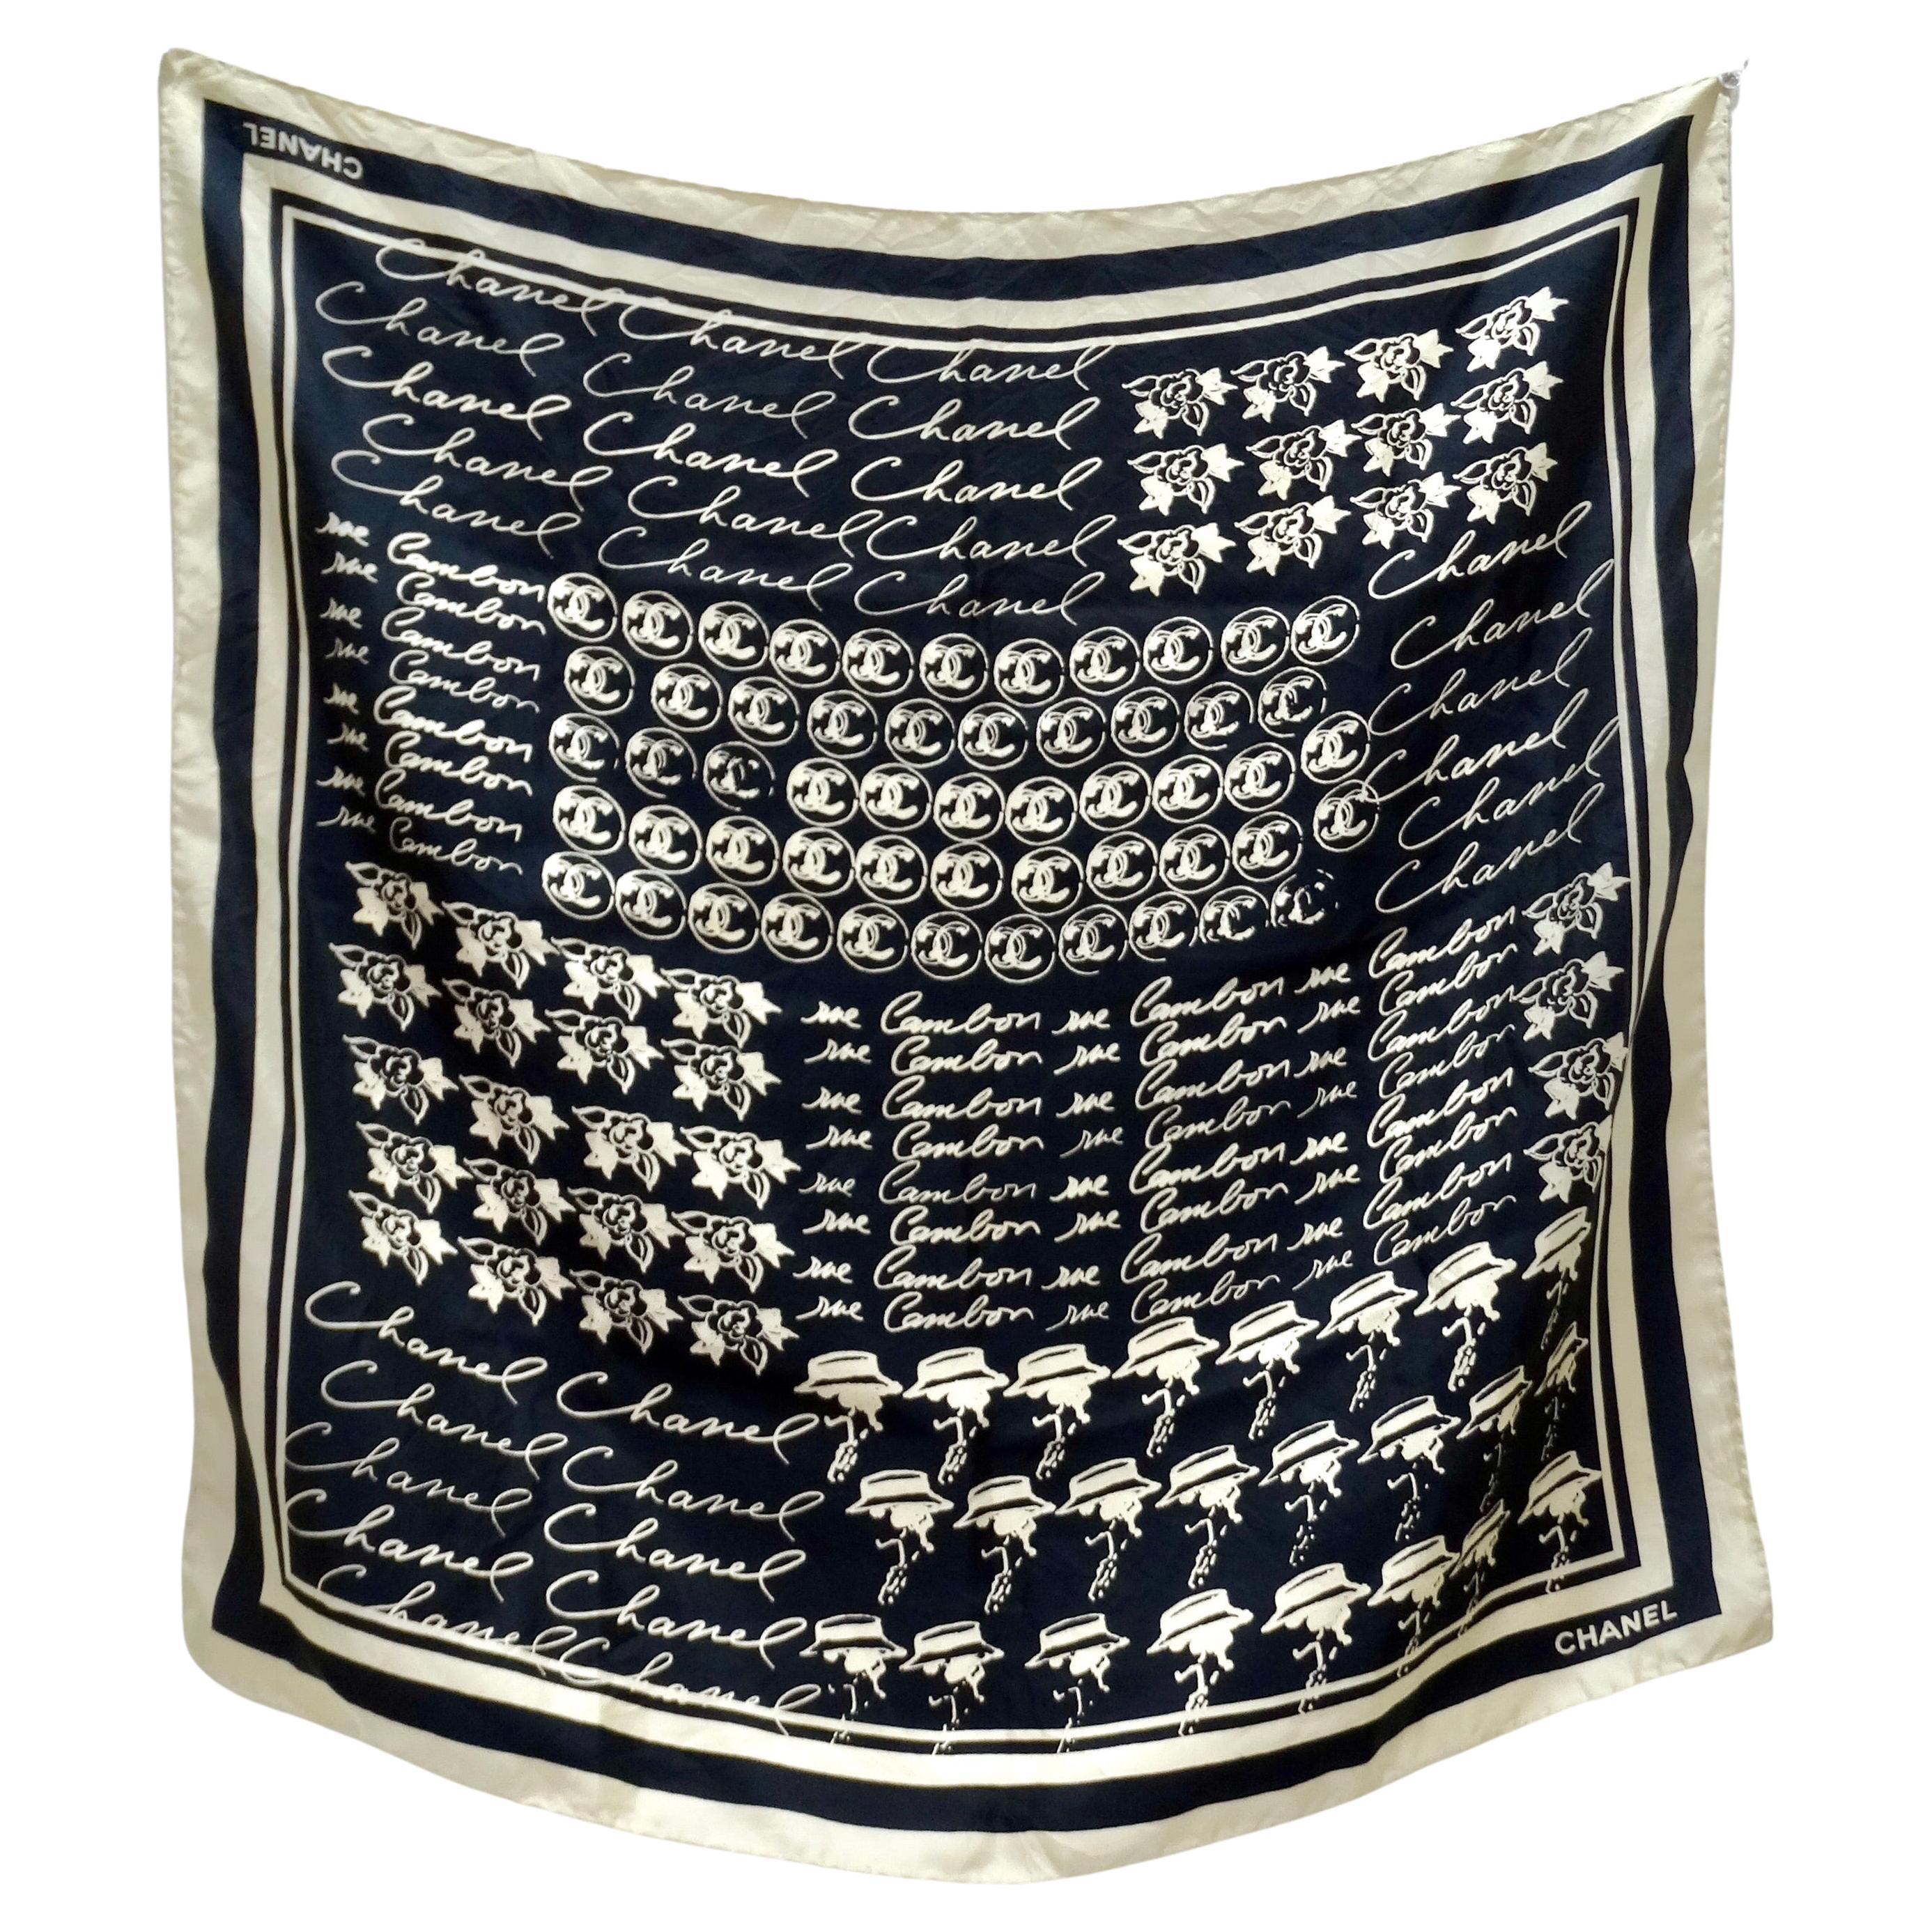 Chanel Graphic Iconic Inscriptions Silk Scarf